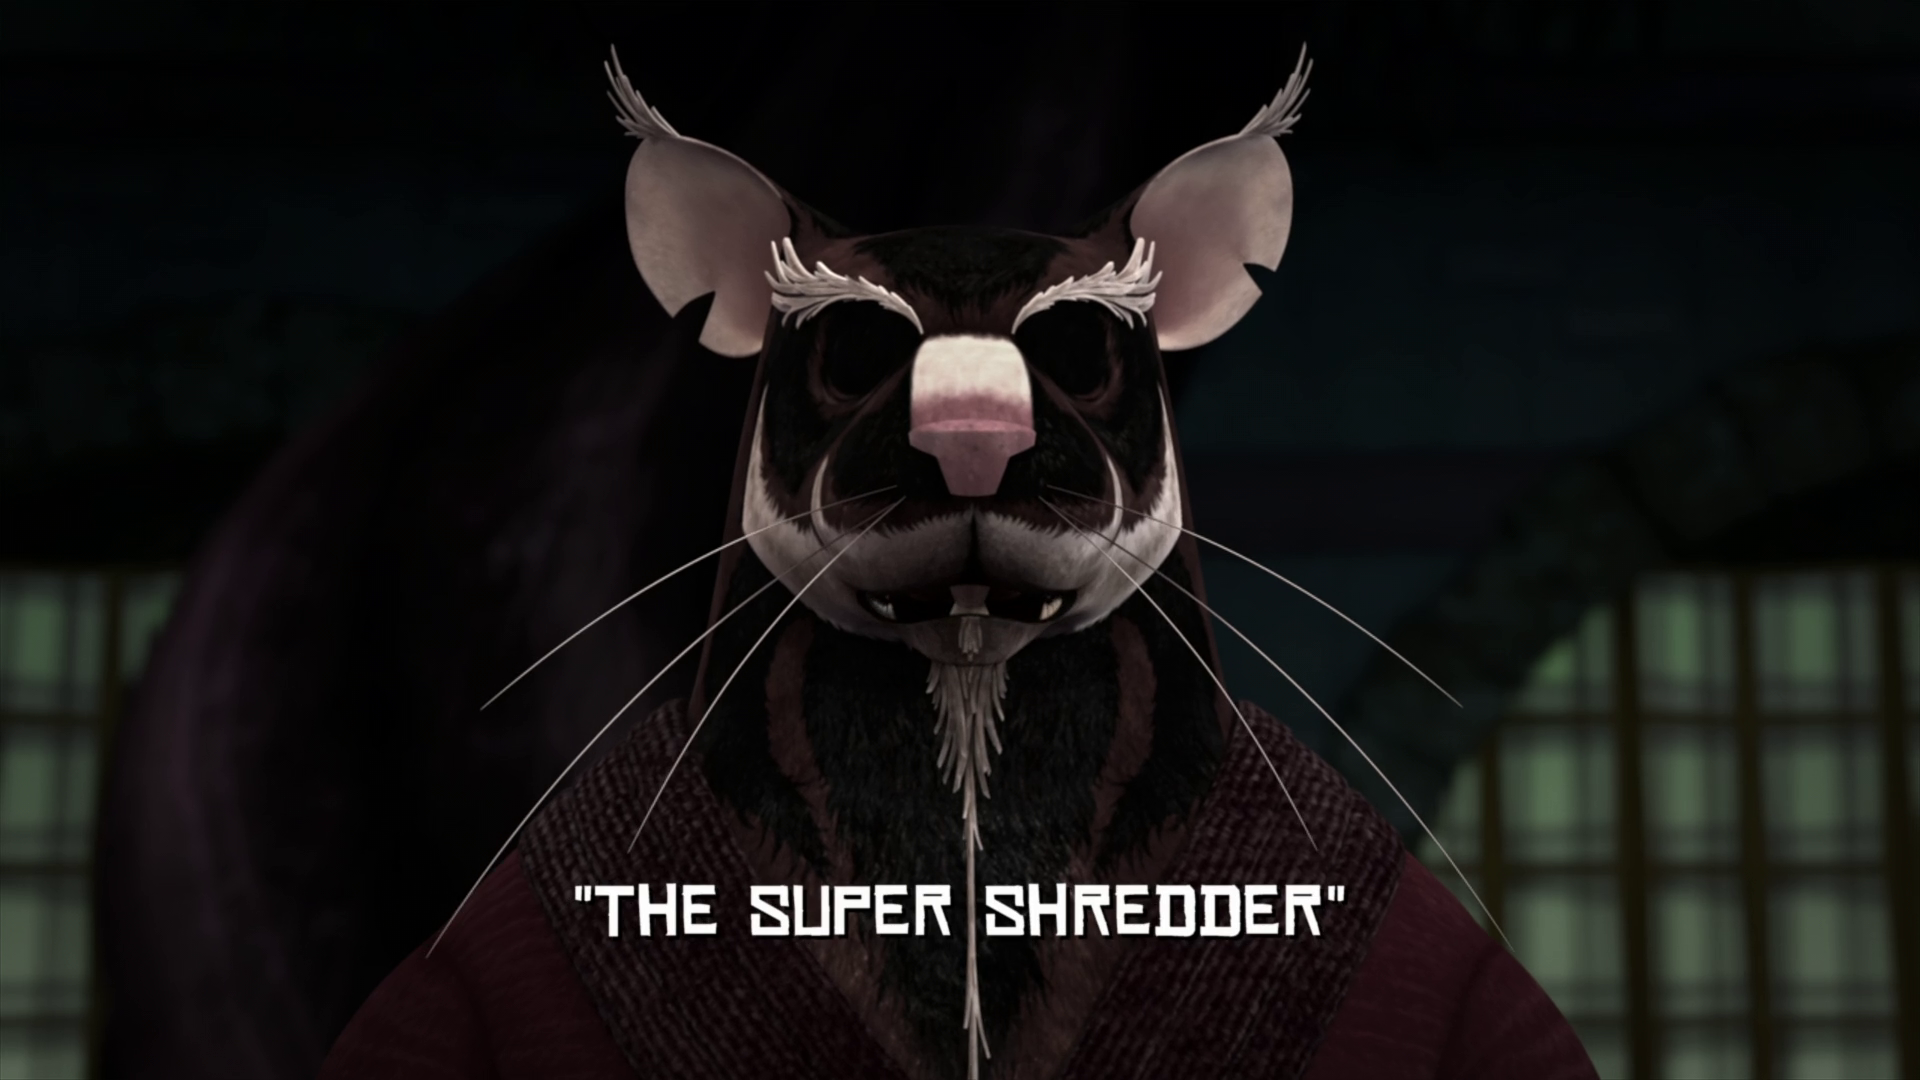 https://static.wikia.nocookie.net/tmnt/images/e/eb/The_Super_Shredder.png/revision/latest?cb=20161107191215